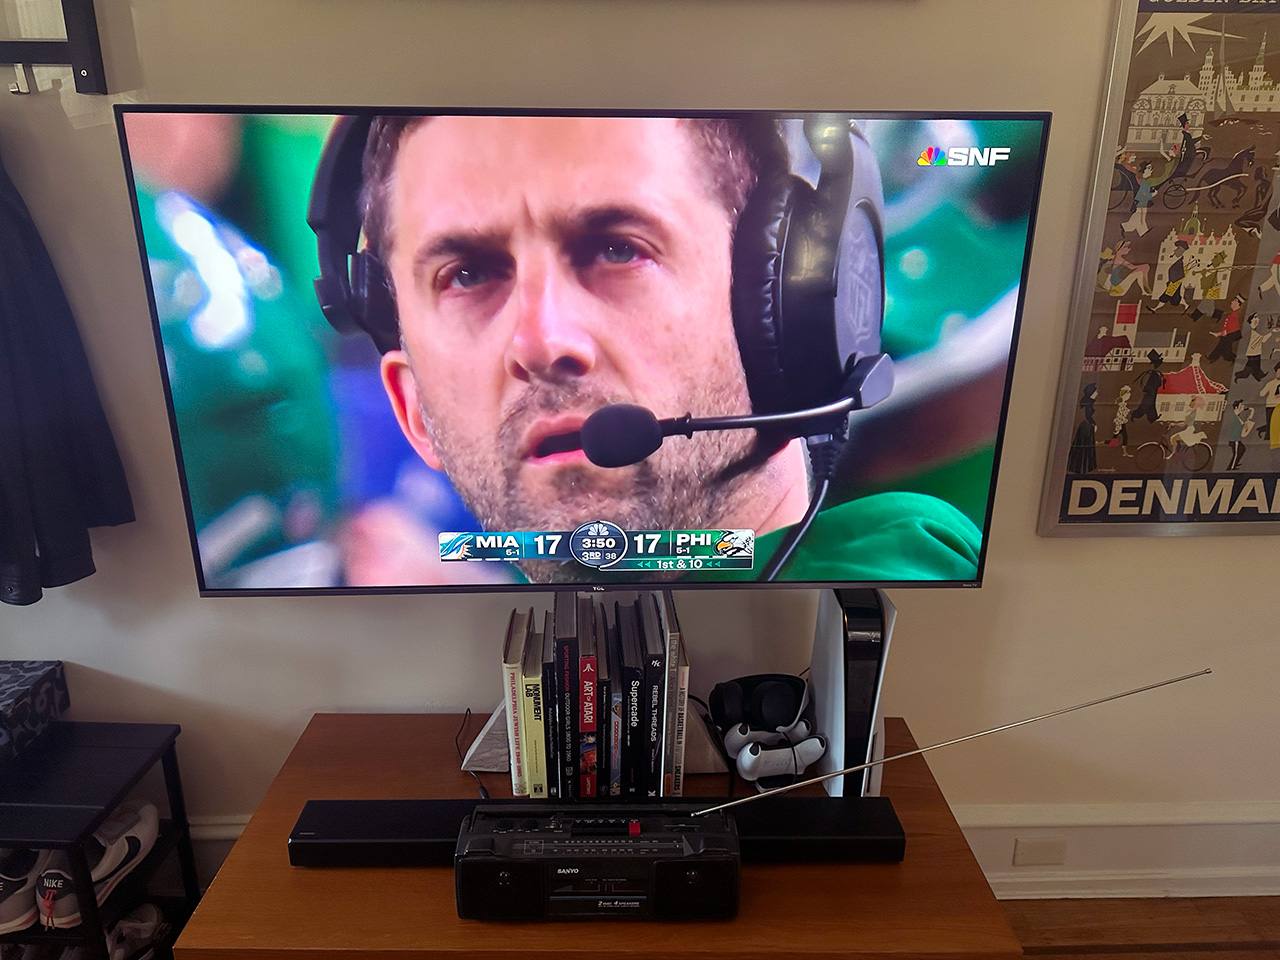 A photo of a television with a Dolphins/Eagles game on it, with Nick Sirianni's face filling the screen. Below it is a media cabinet, and there are some books and a PS5 behind a sound bar. In front of that sound bar is a small 1980s boombox.